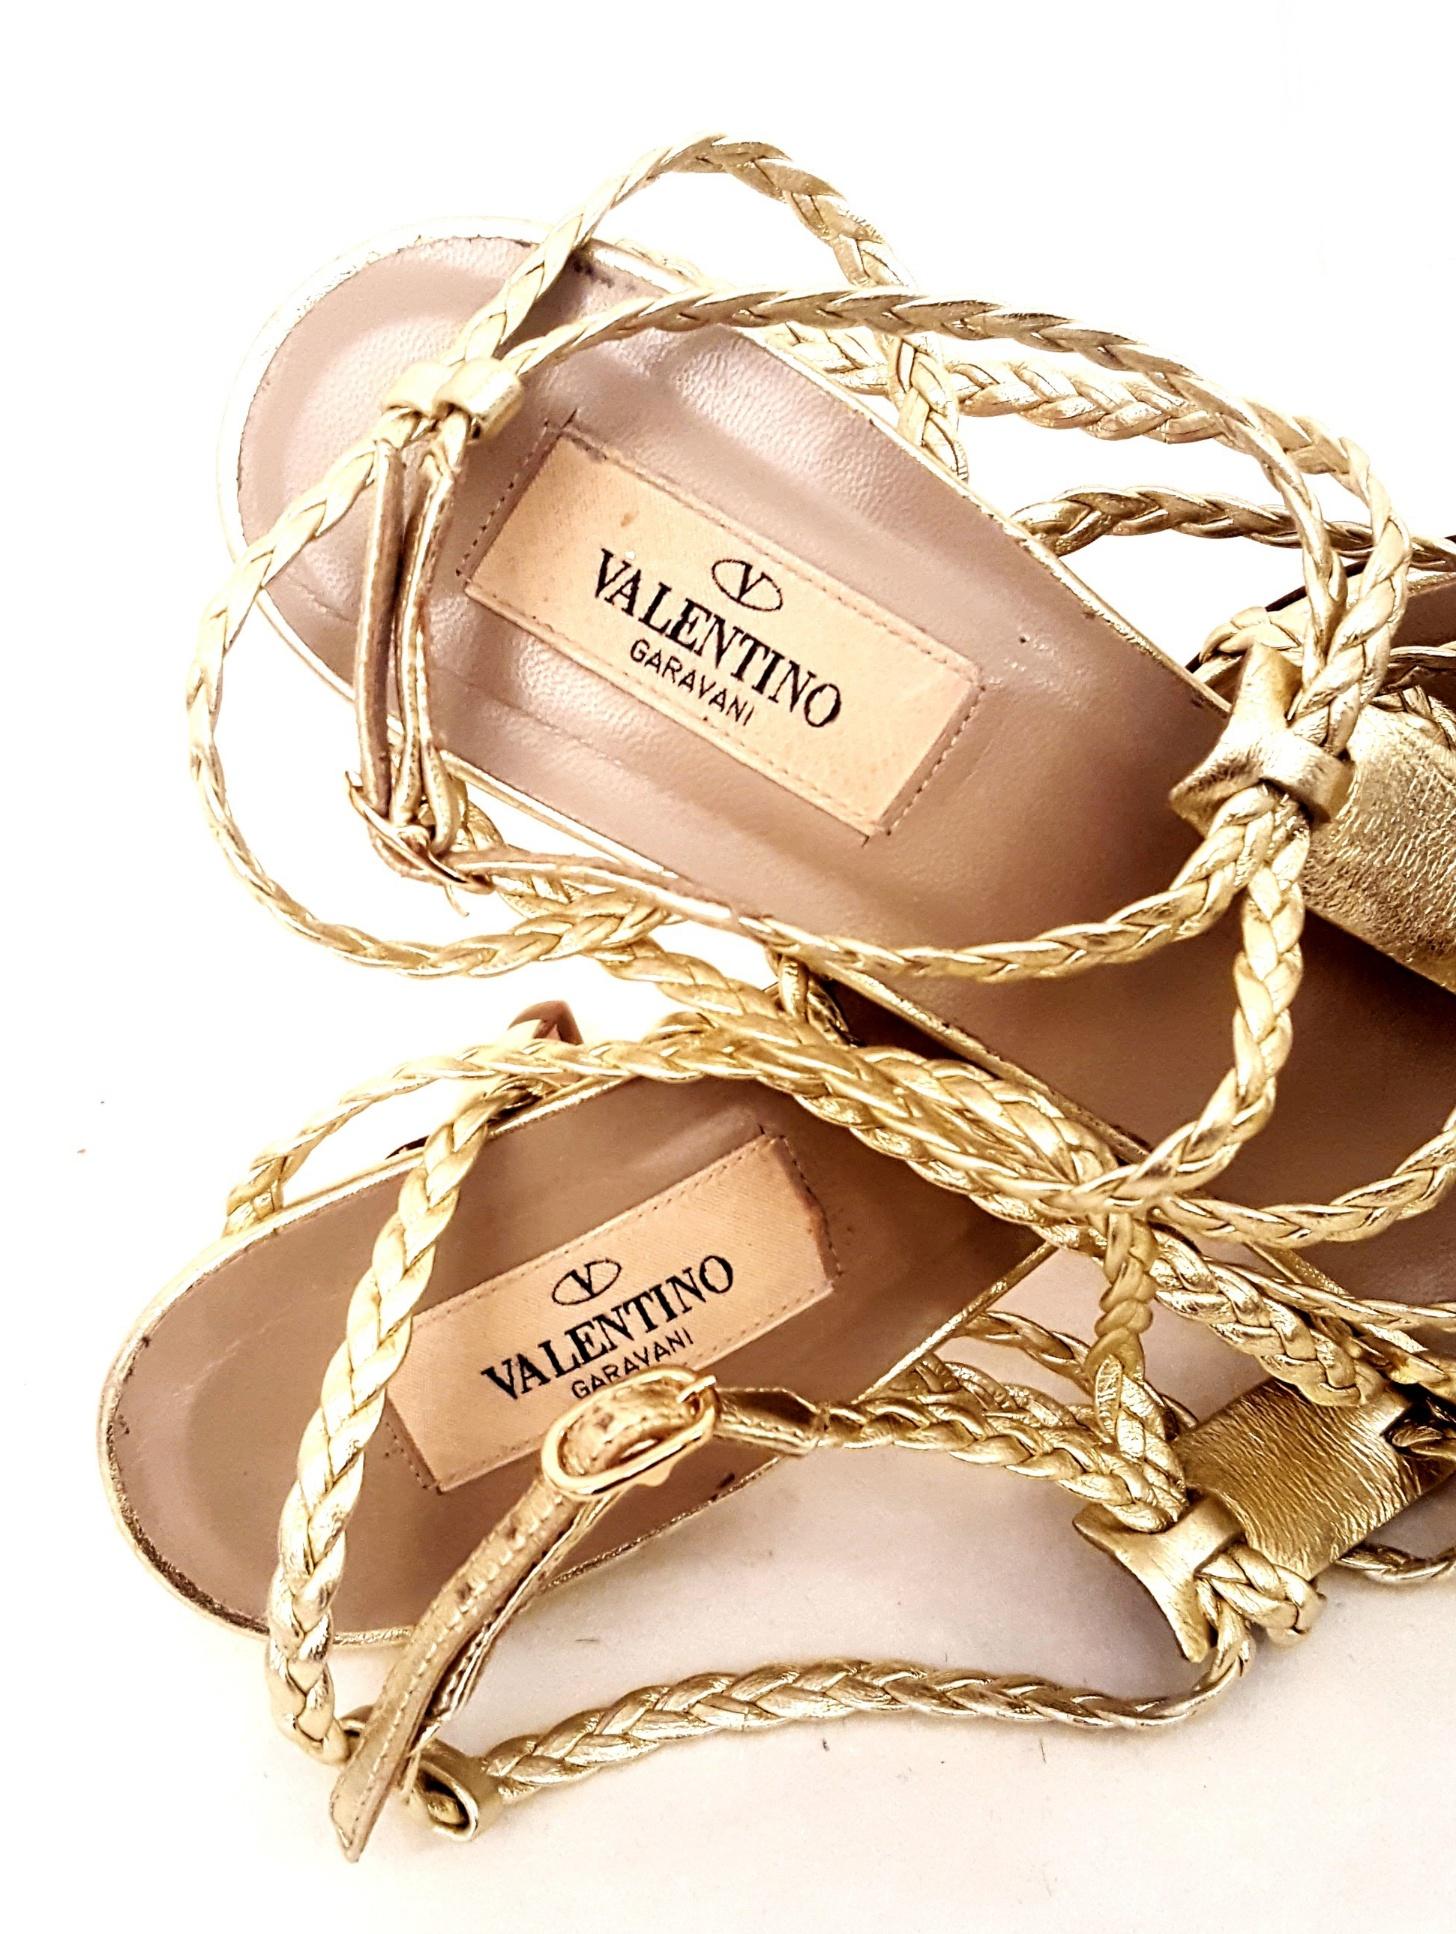 Valentino Gold Tone Braided Strappy Open Toe Sandals For Sale 5